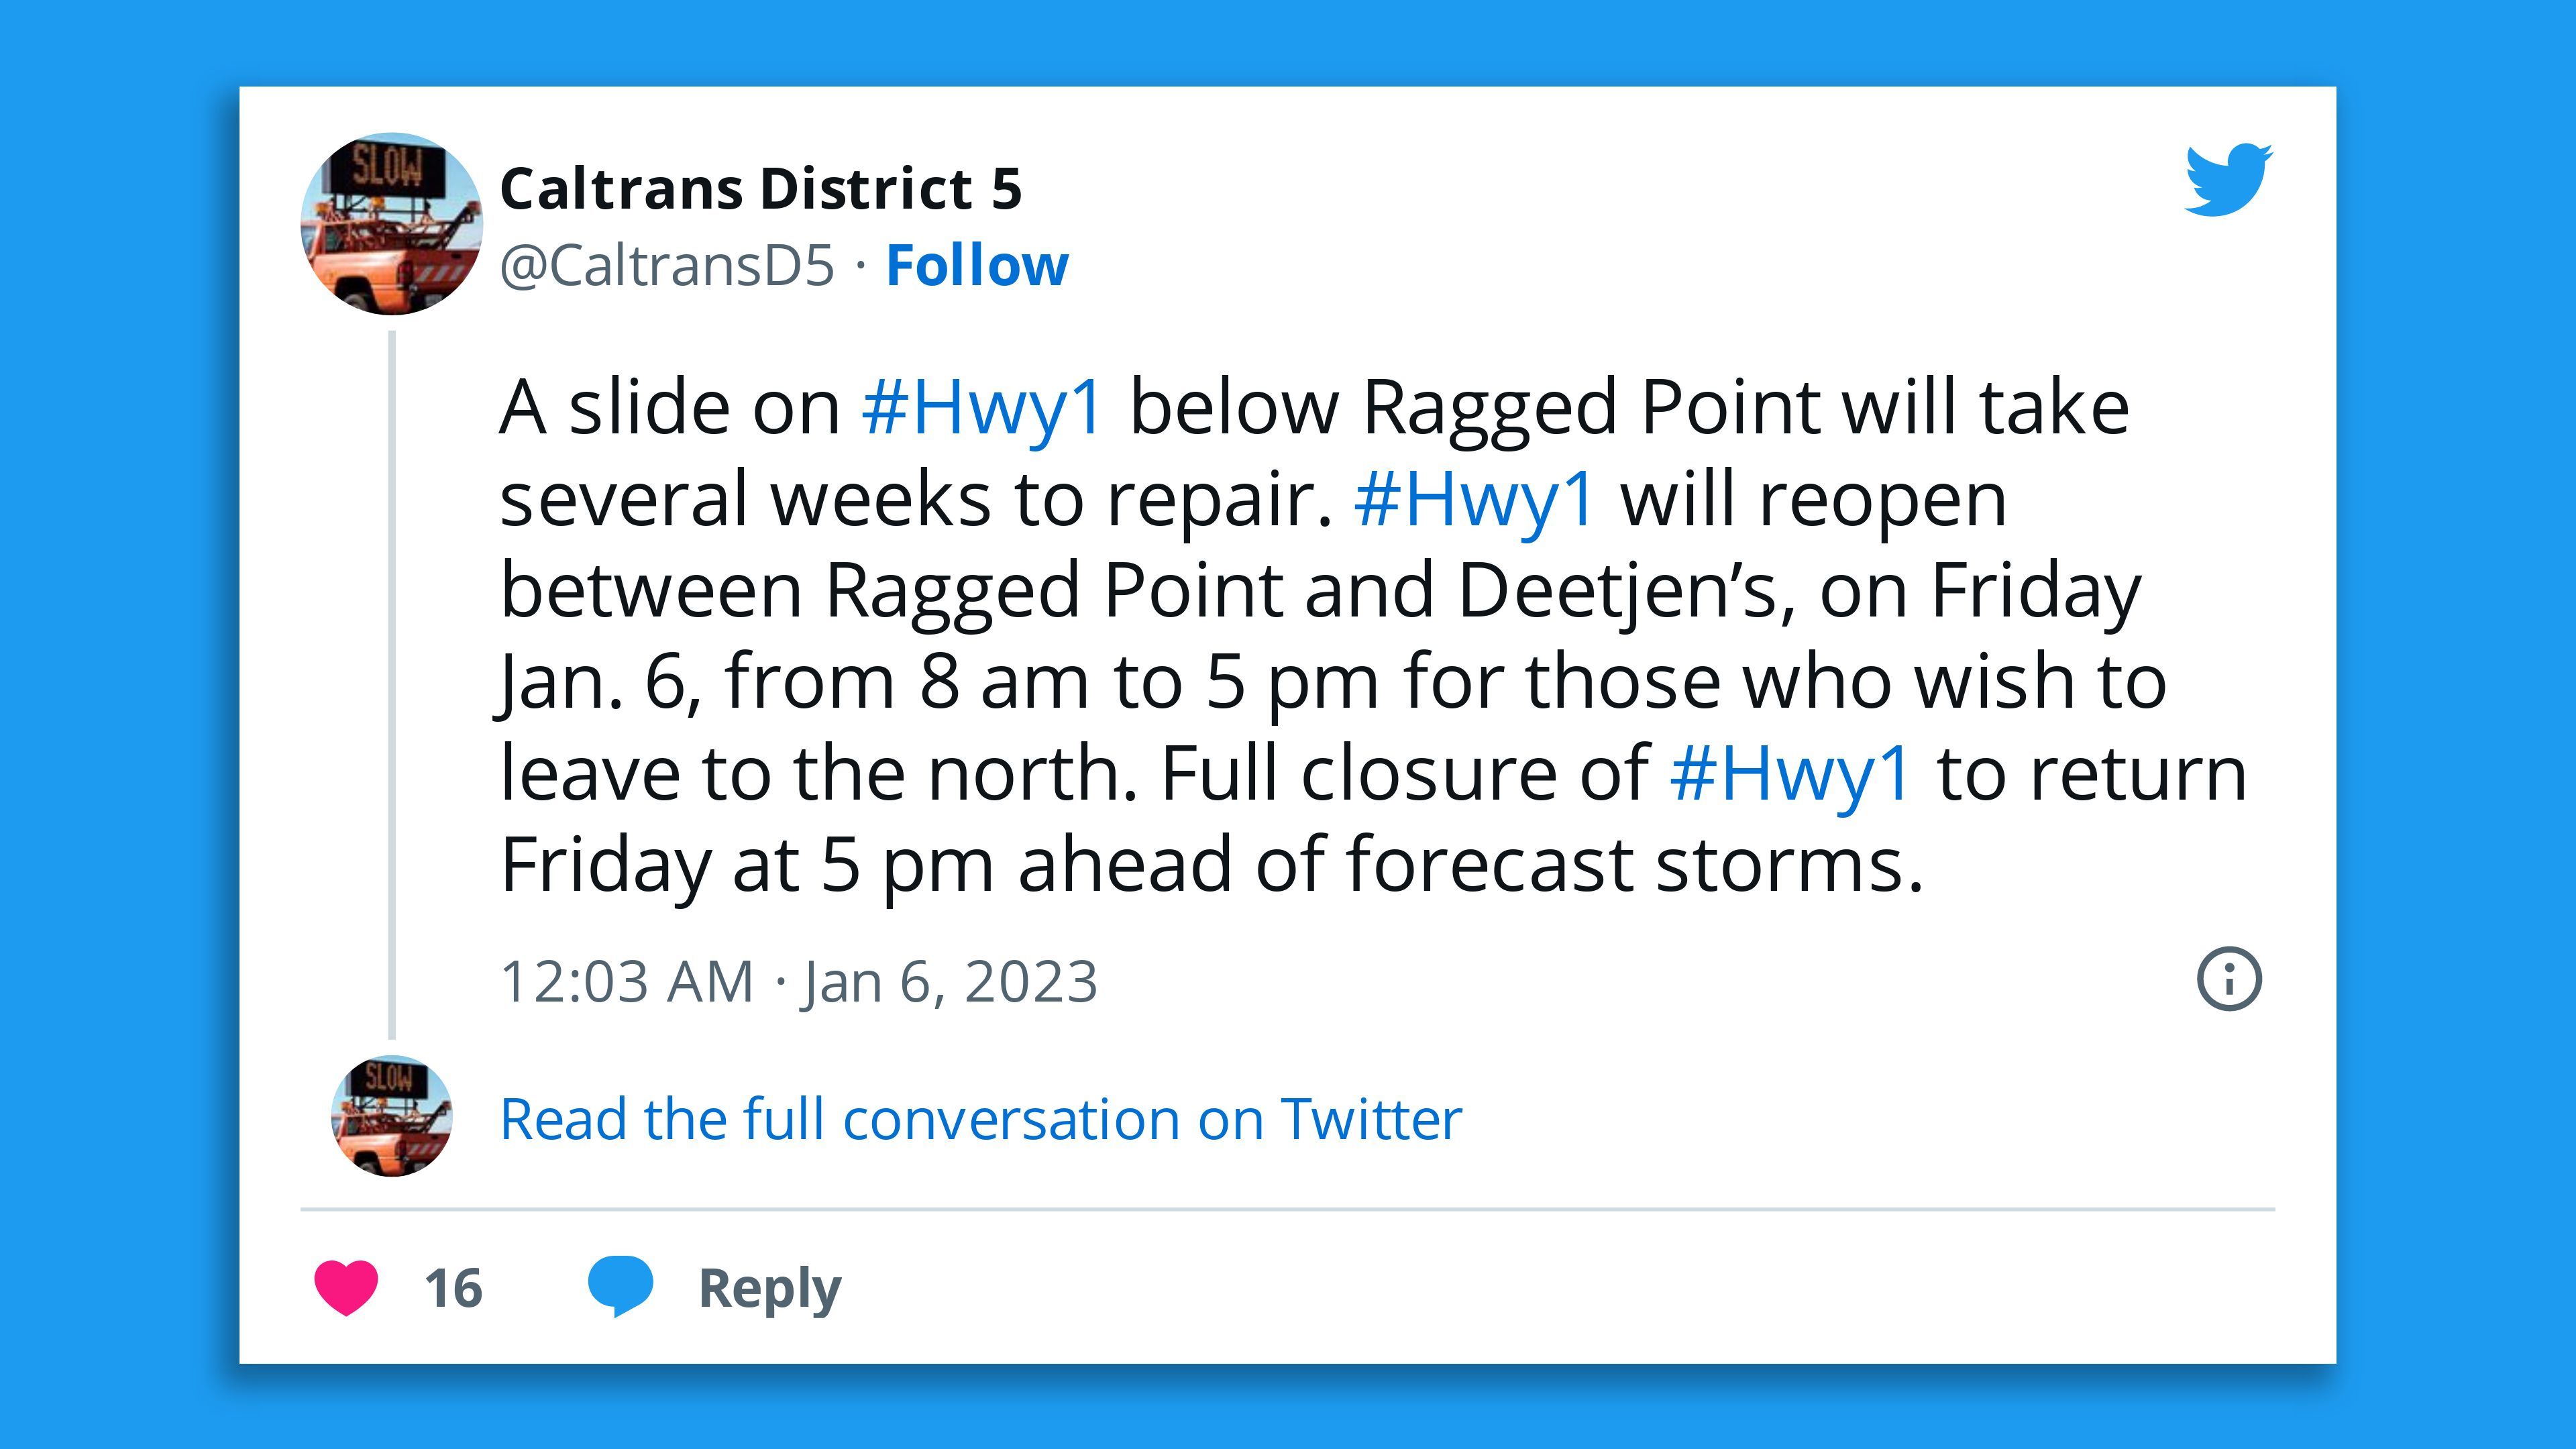 A screenshot of a tweet by the California Department of Transportation (Caltrans), District 5 - San Luis Obispo stating that a "slide on #Hwy1 below Ragged Point will take several weeks to repair."